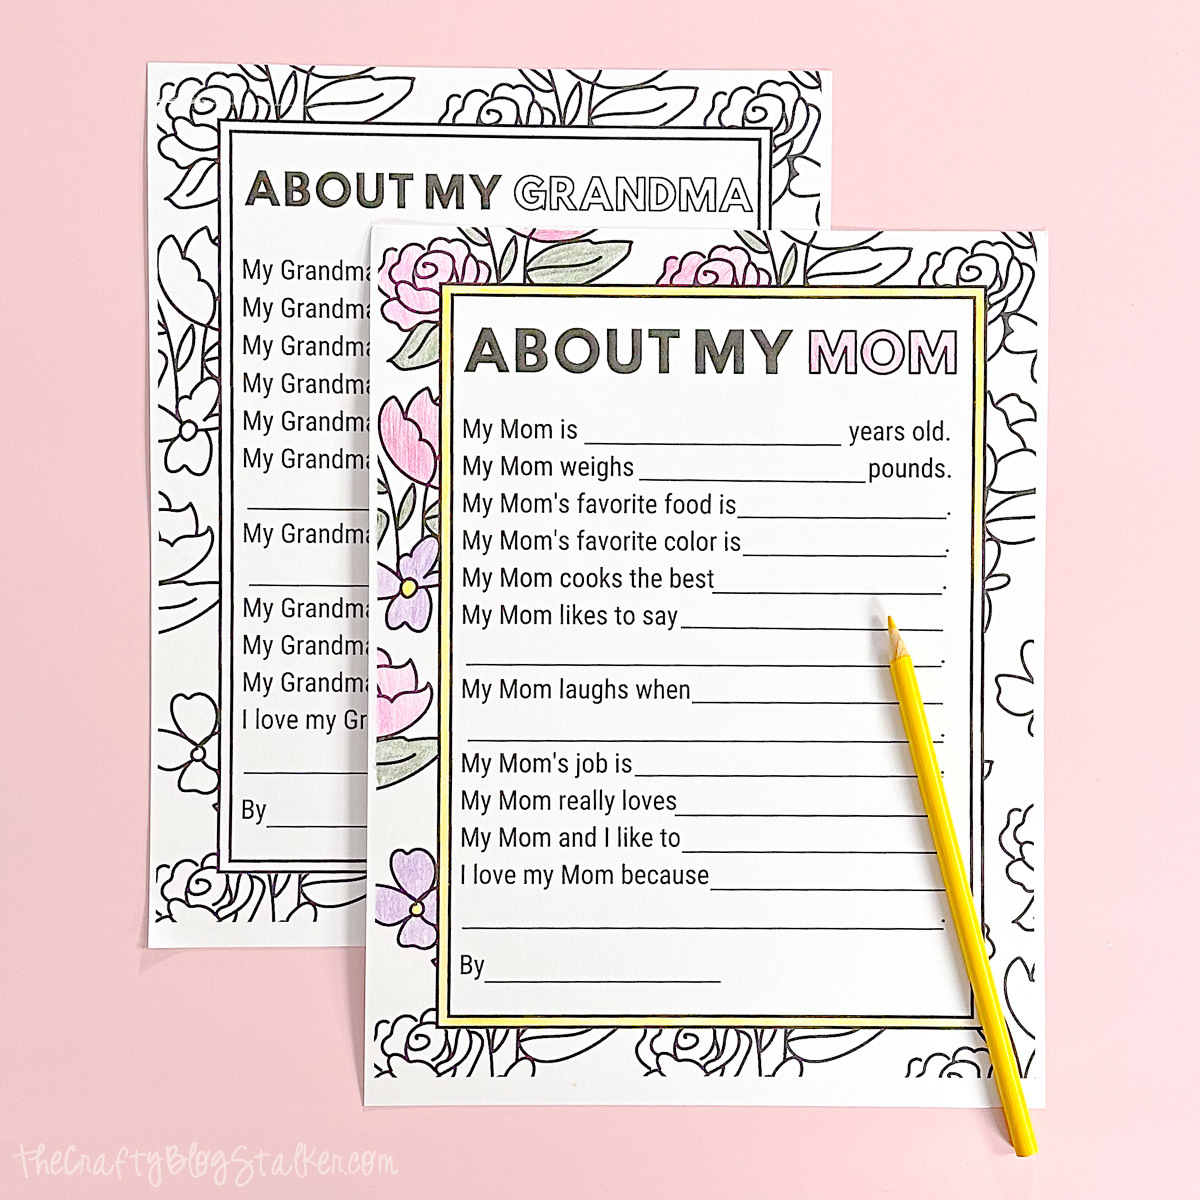 mother-s-day-questionnaire-printable-for-mom-and-grandma